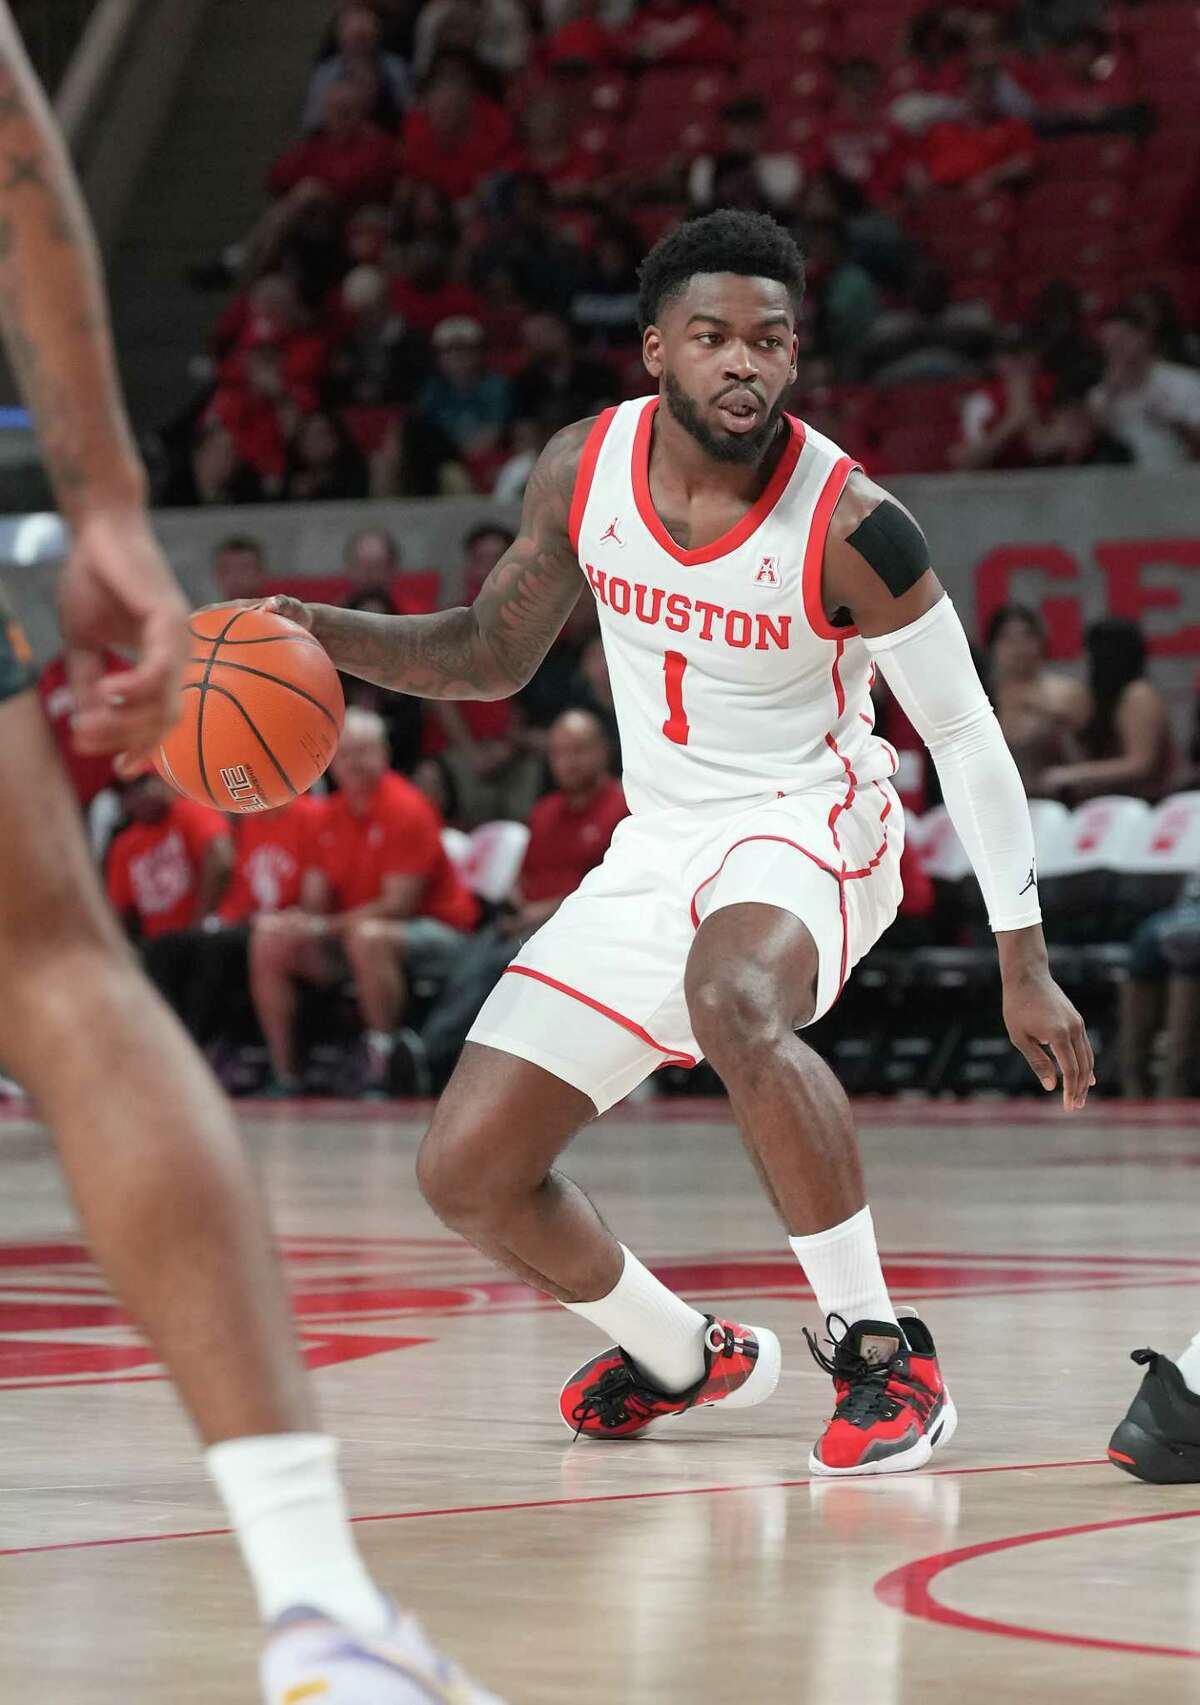 Houston Cougars guard Jamal Shead (1) drives the ball across court against North Carolina A&T Aggies in the second half at the Fertitta Center on Tuesday, Dec. 13, 2022 in Houston. Houston Cougars won the game 74-46.